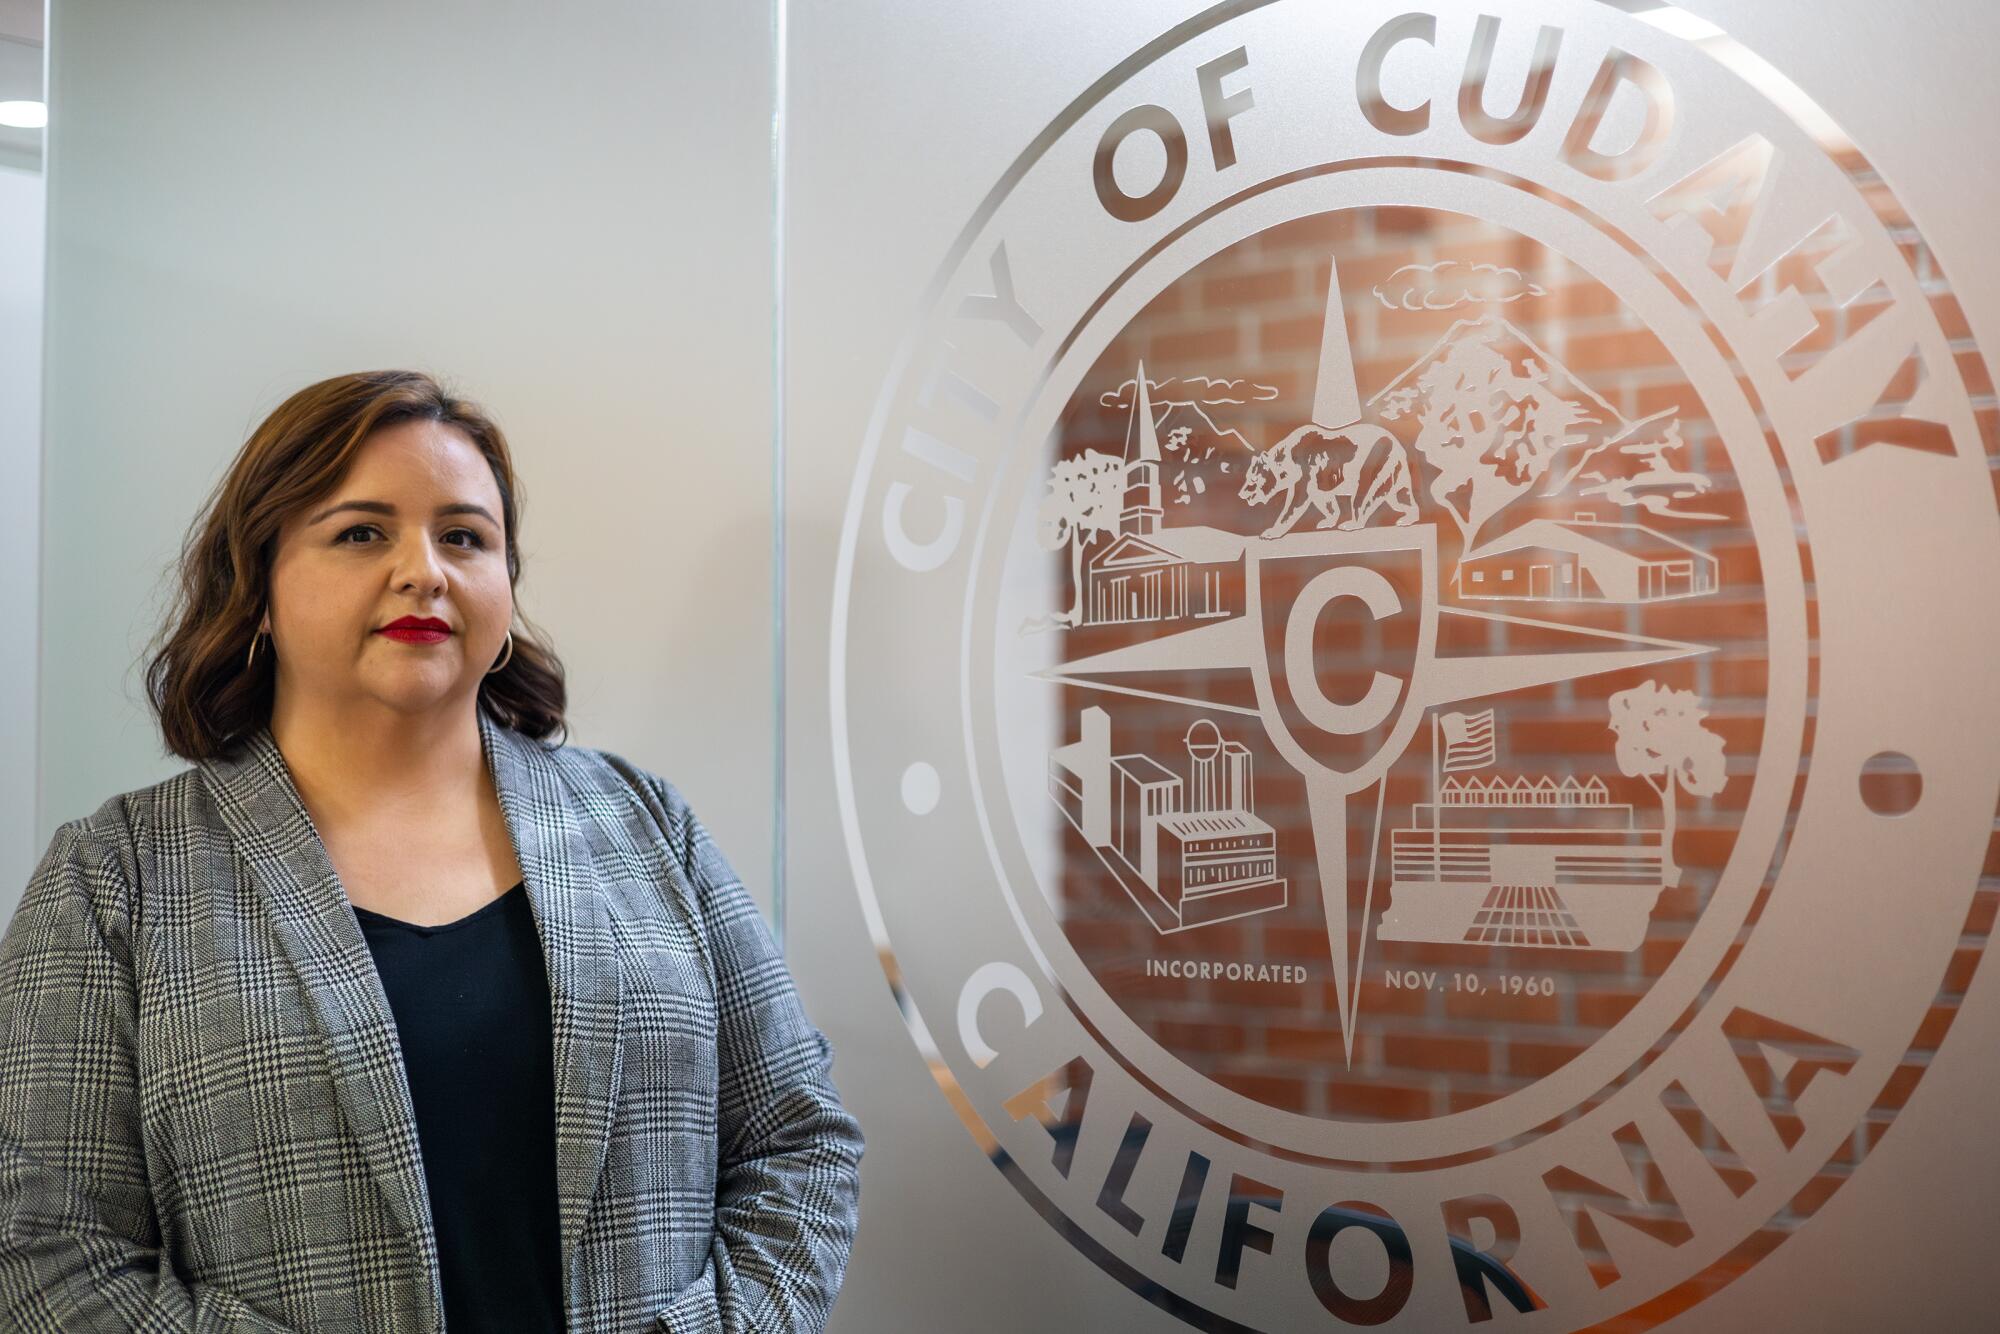 Mayor Daisy Lomeli said Cudahy residents “can connect with the shared experience of Palestinian people."